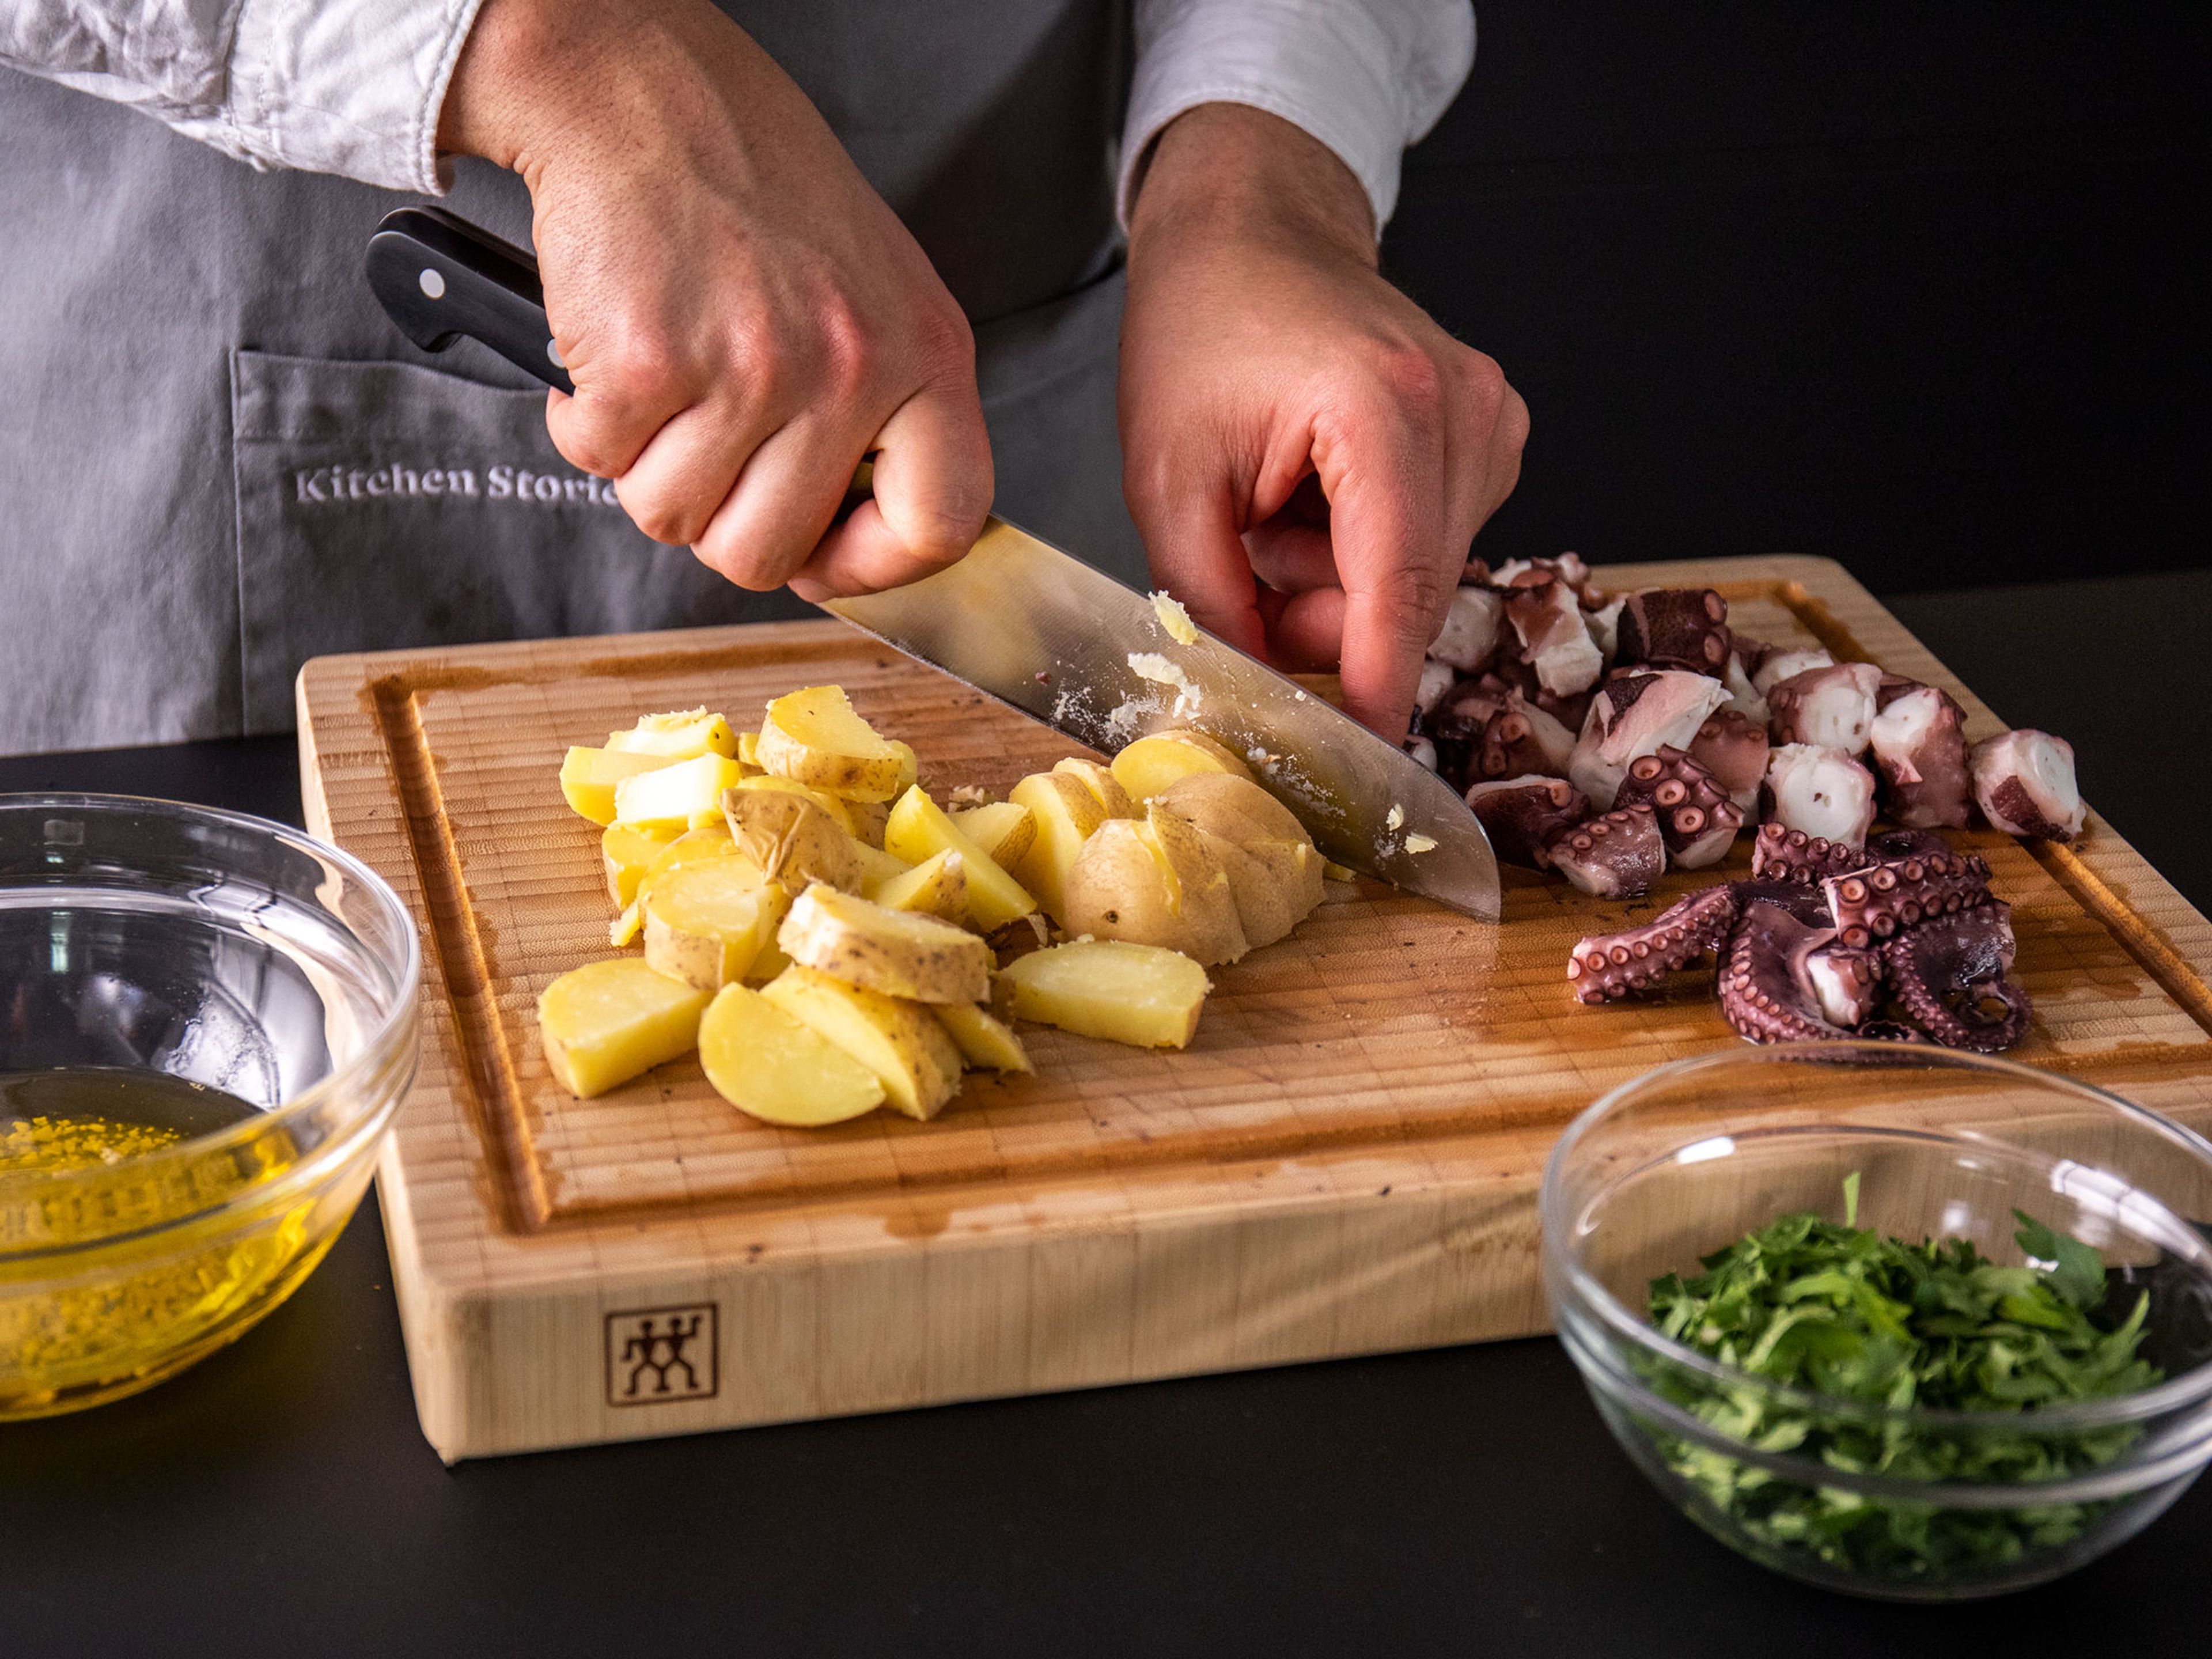 Remove octopus from pot and drain. Cut octopus and potatoes into bite-sized pieces and mix both immediately with the dressing in a large bowl. Season with salt and pepper and serve warm. Enjoy!